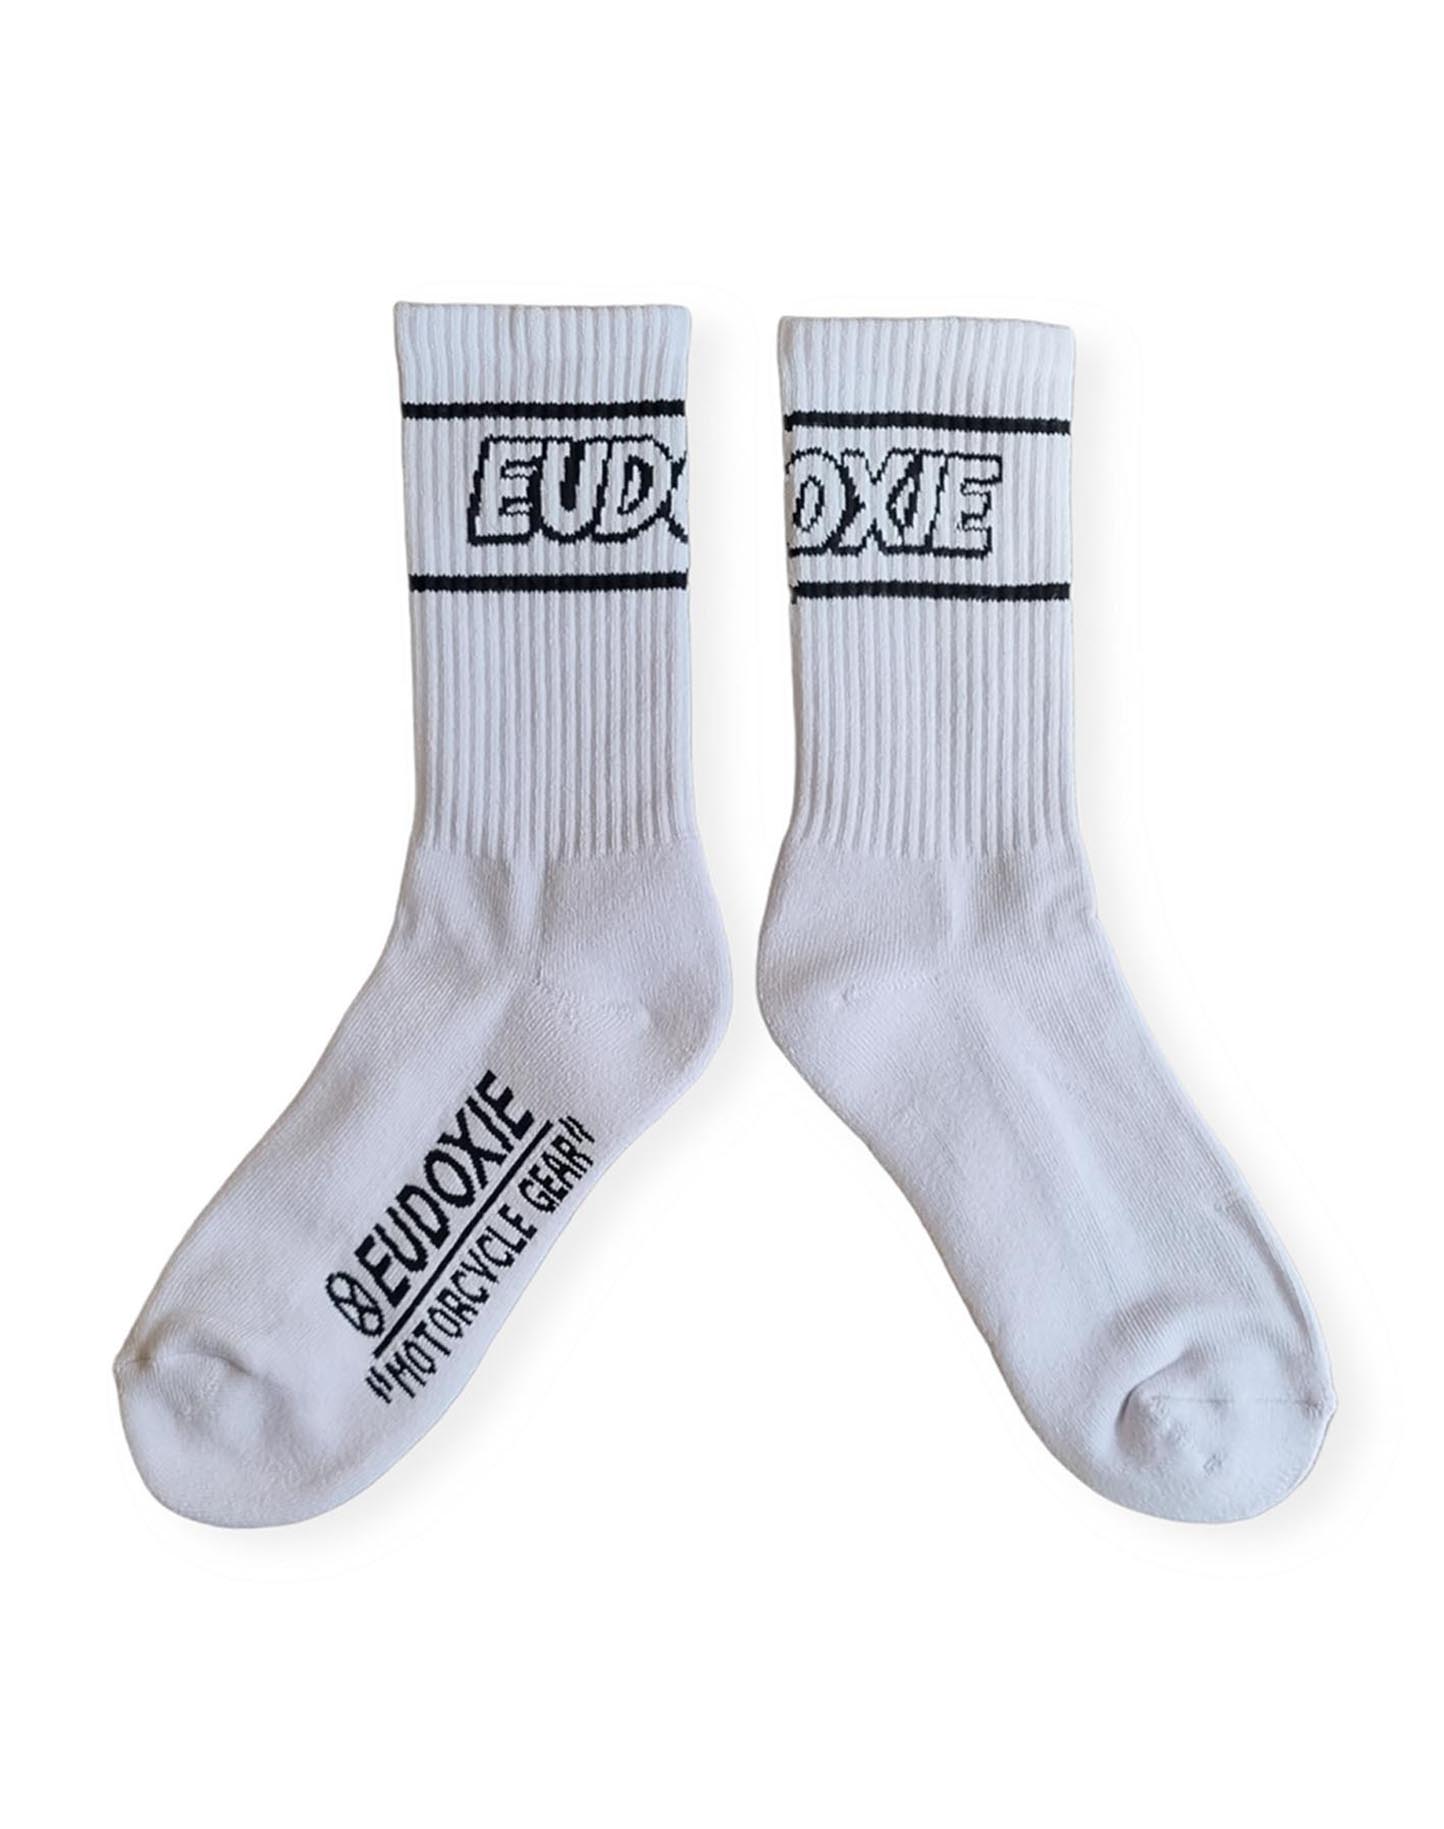 Chaussettes Eudoxie - Eudoxie